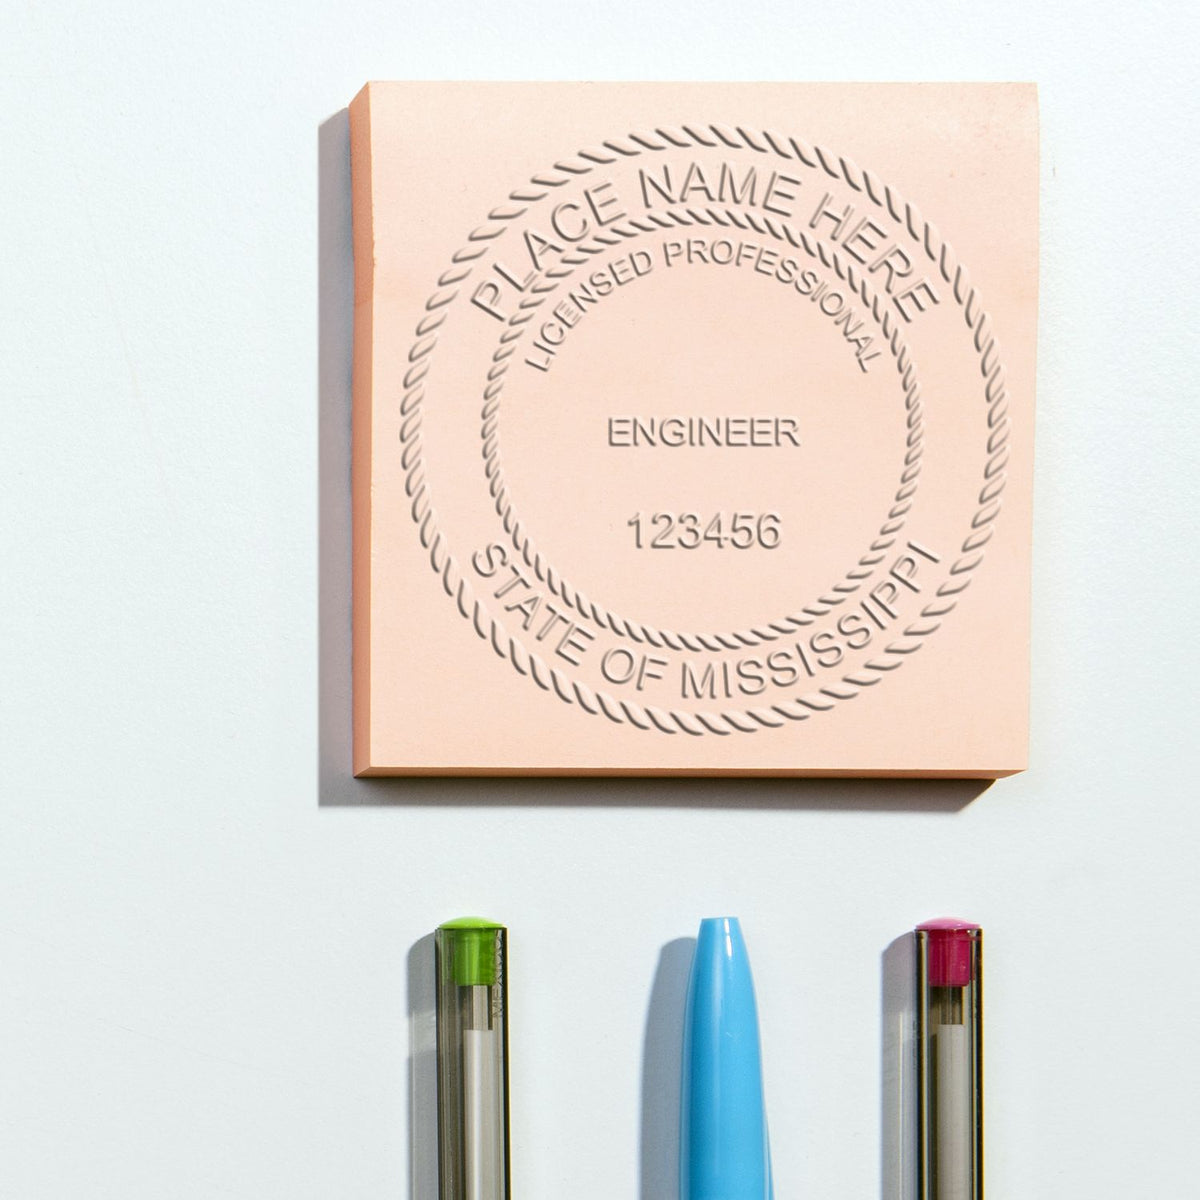 An in use photo of the Gift Mississippi Engineer Seal showing a sample imprint on a cardstock